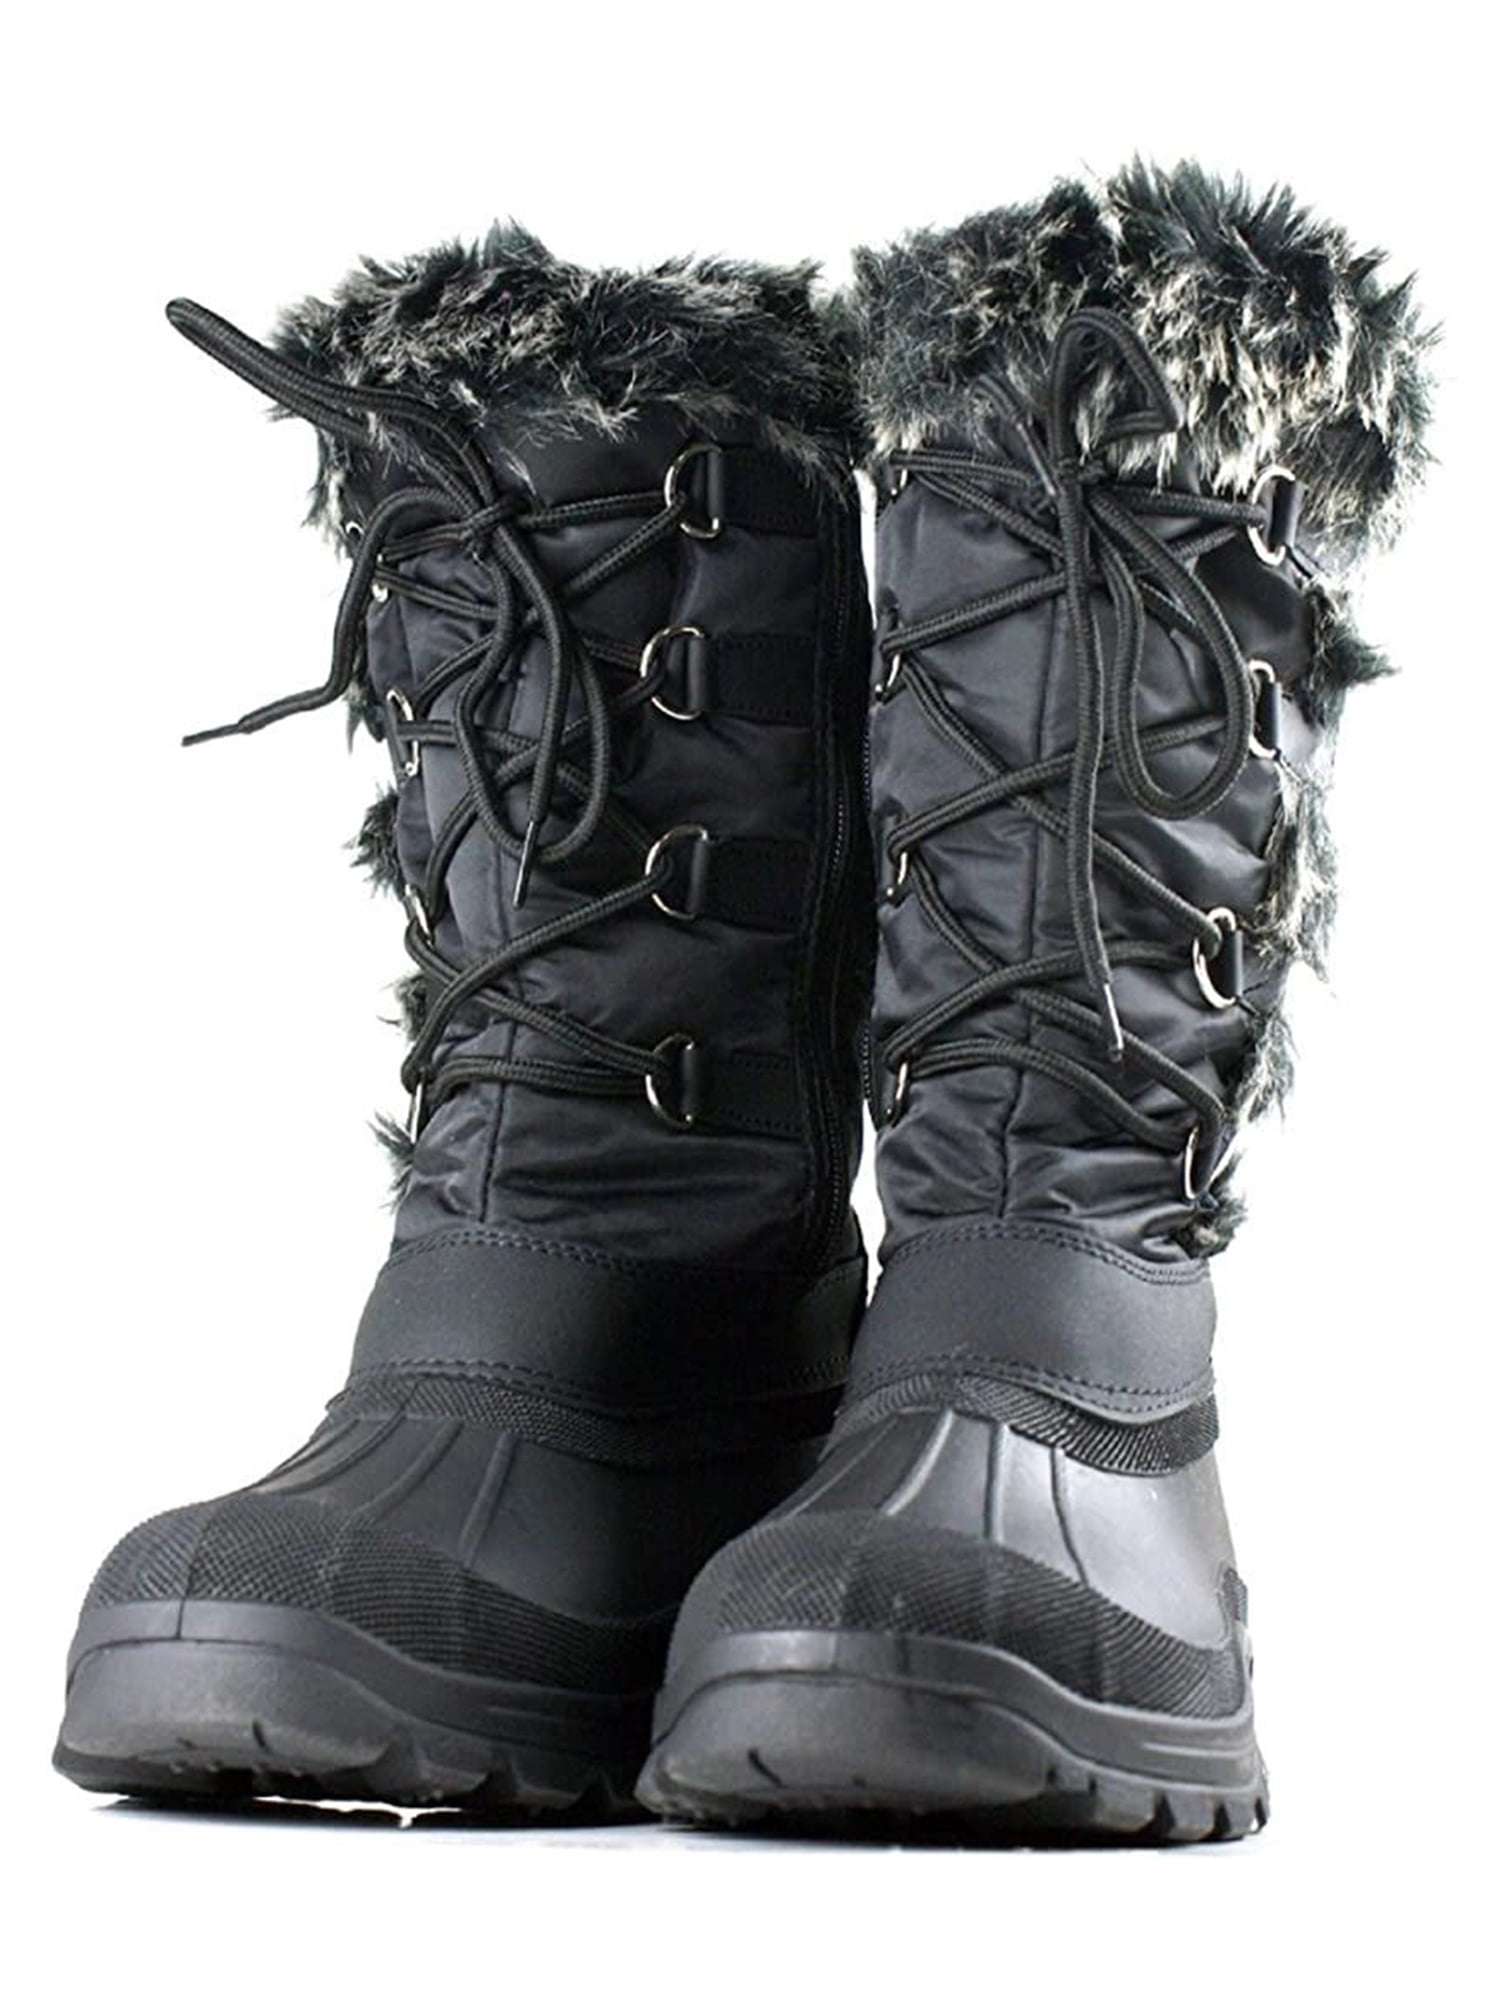 Women s winter boots with fur